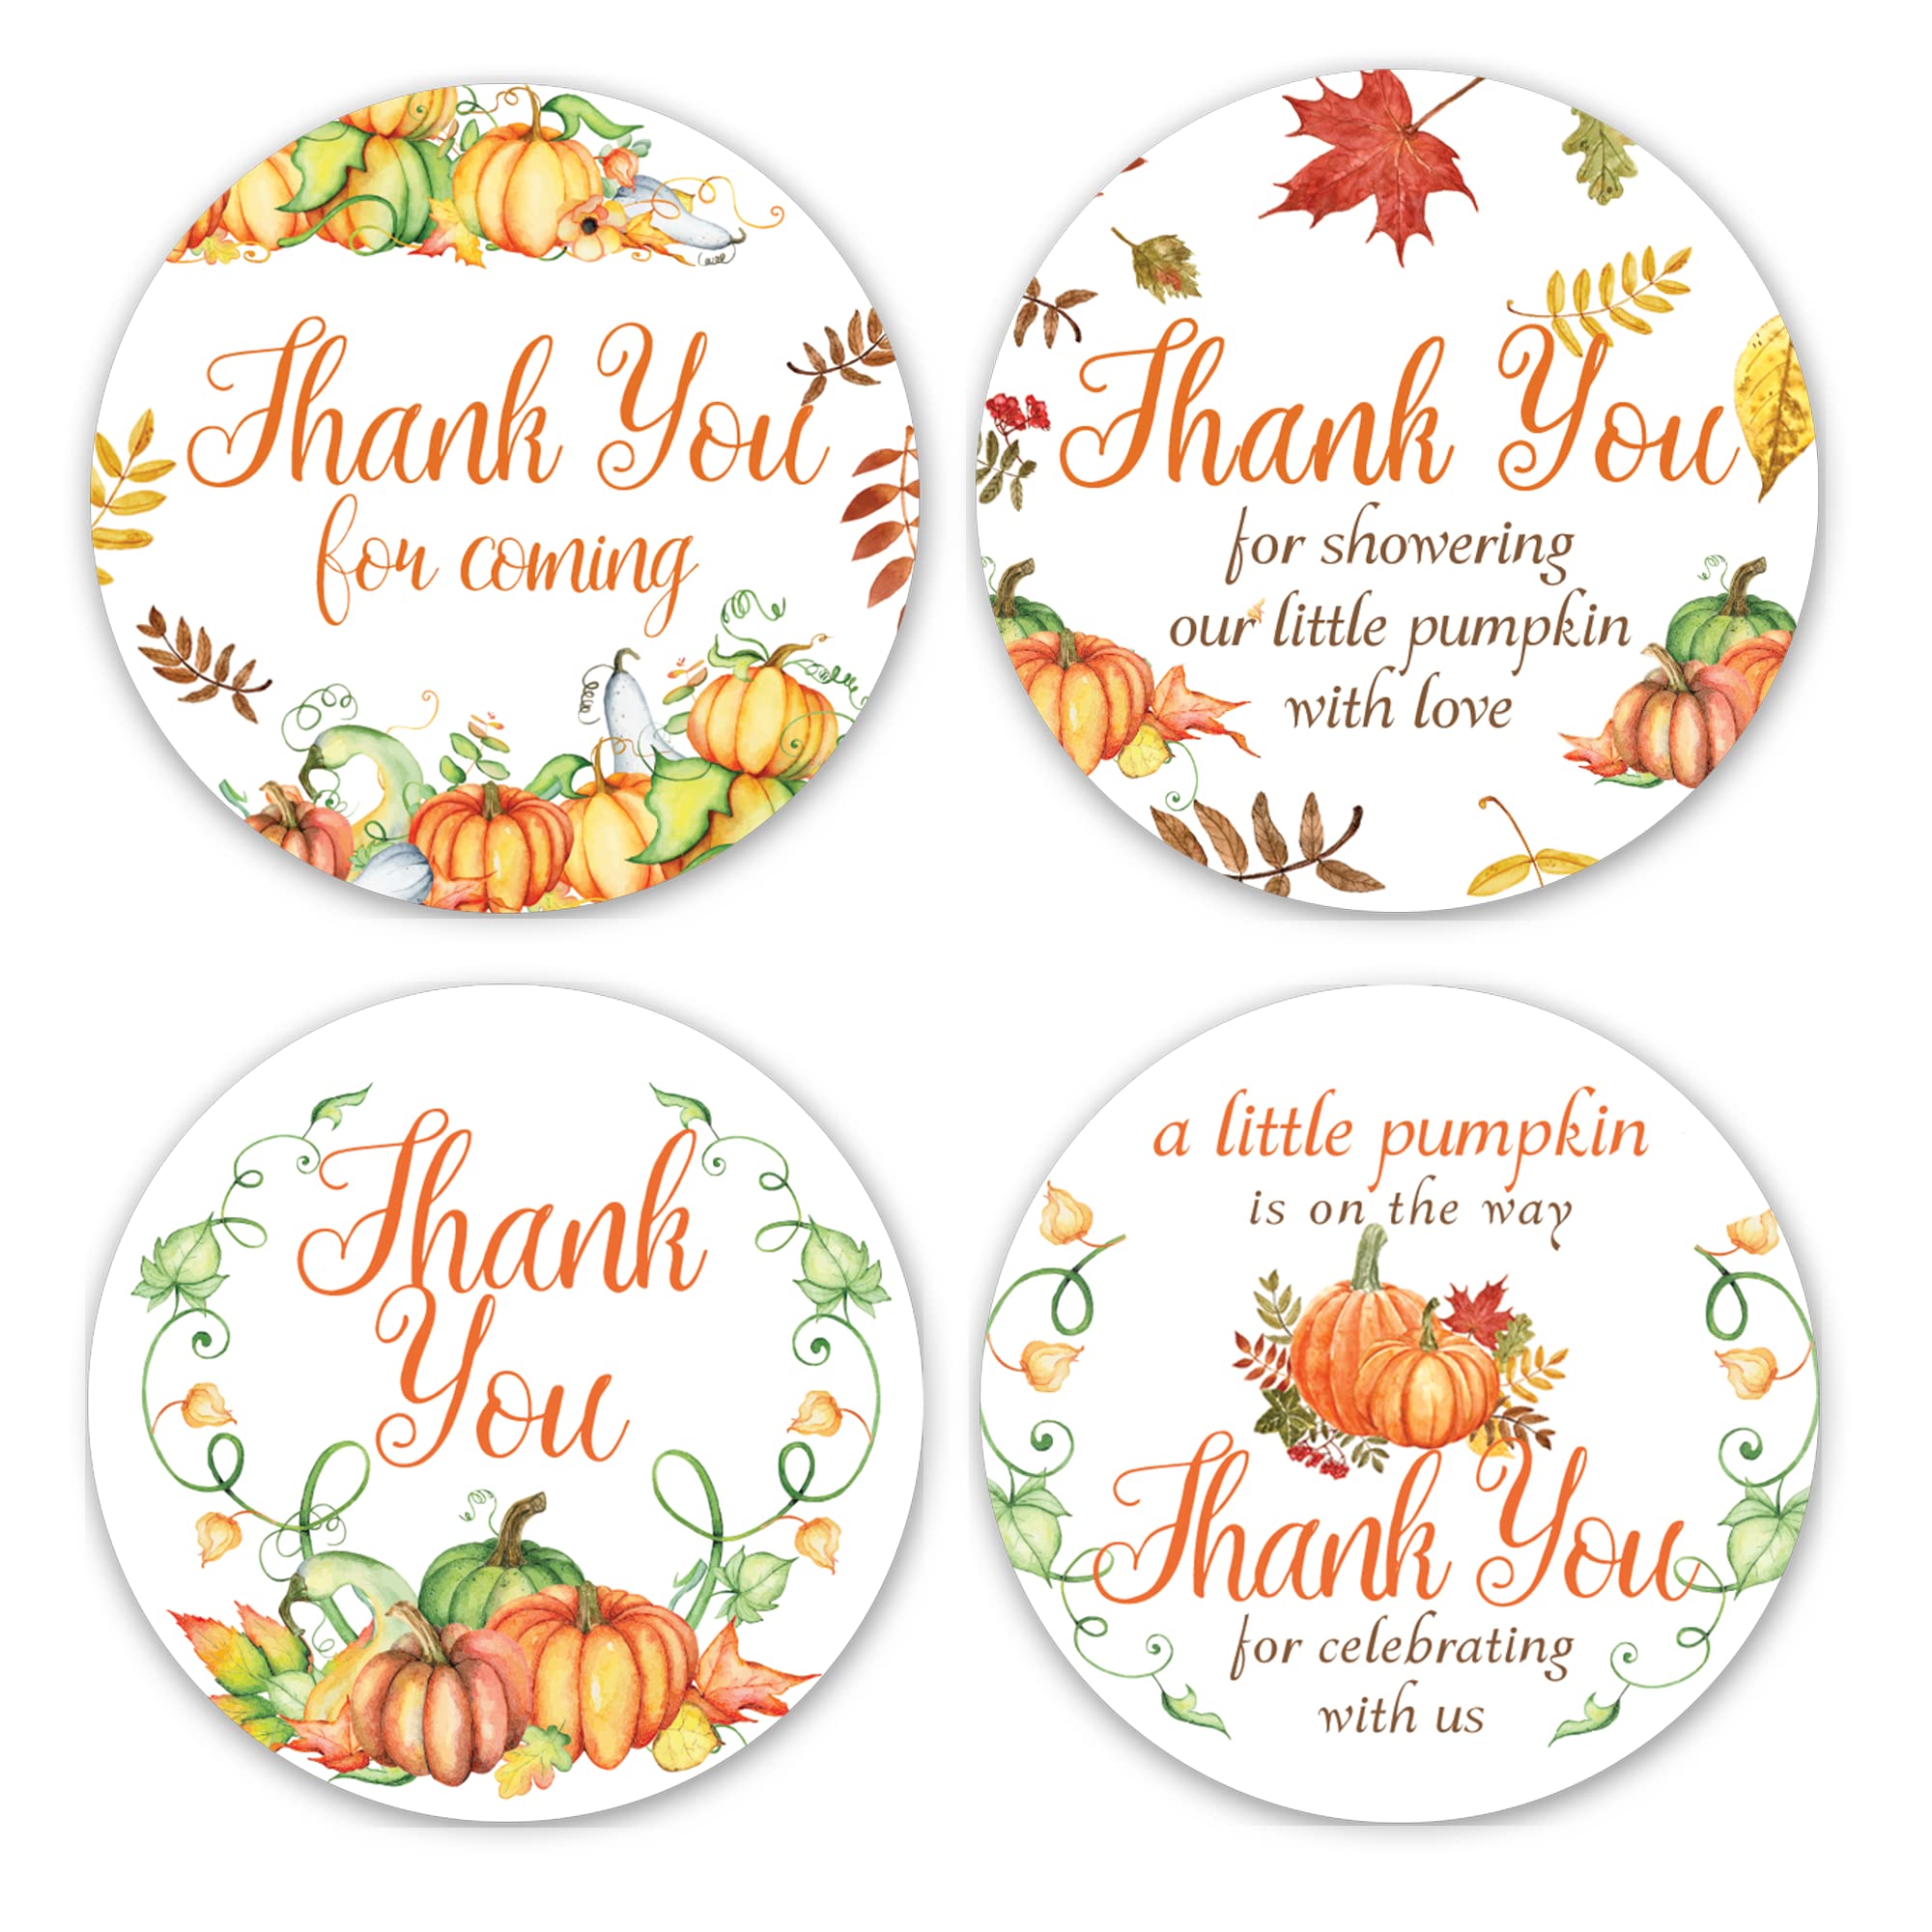 Thank You Baby Shower Stickers - Set of 80 Thank You for Coming Stickers, Preprinted Bridal Shower stickers, Birthday Party Favor Sticker, Self Adhesive Flat Sheet 2 Inch Round Labels LemonTheme Party (Pumpkin)